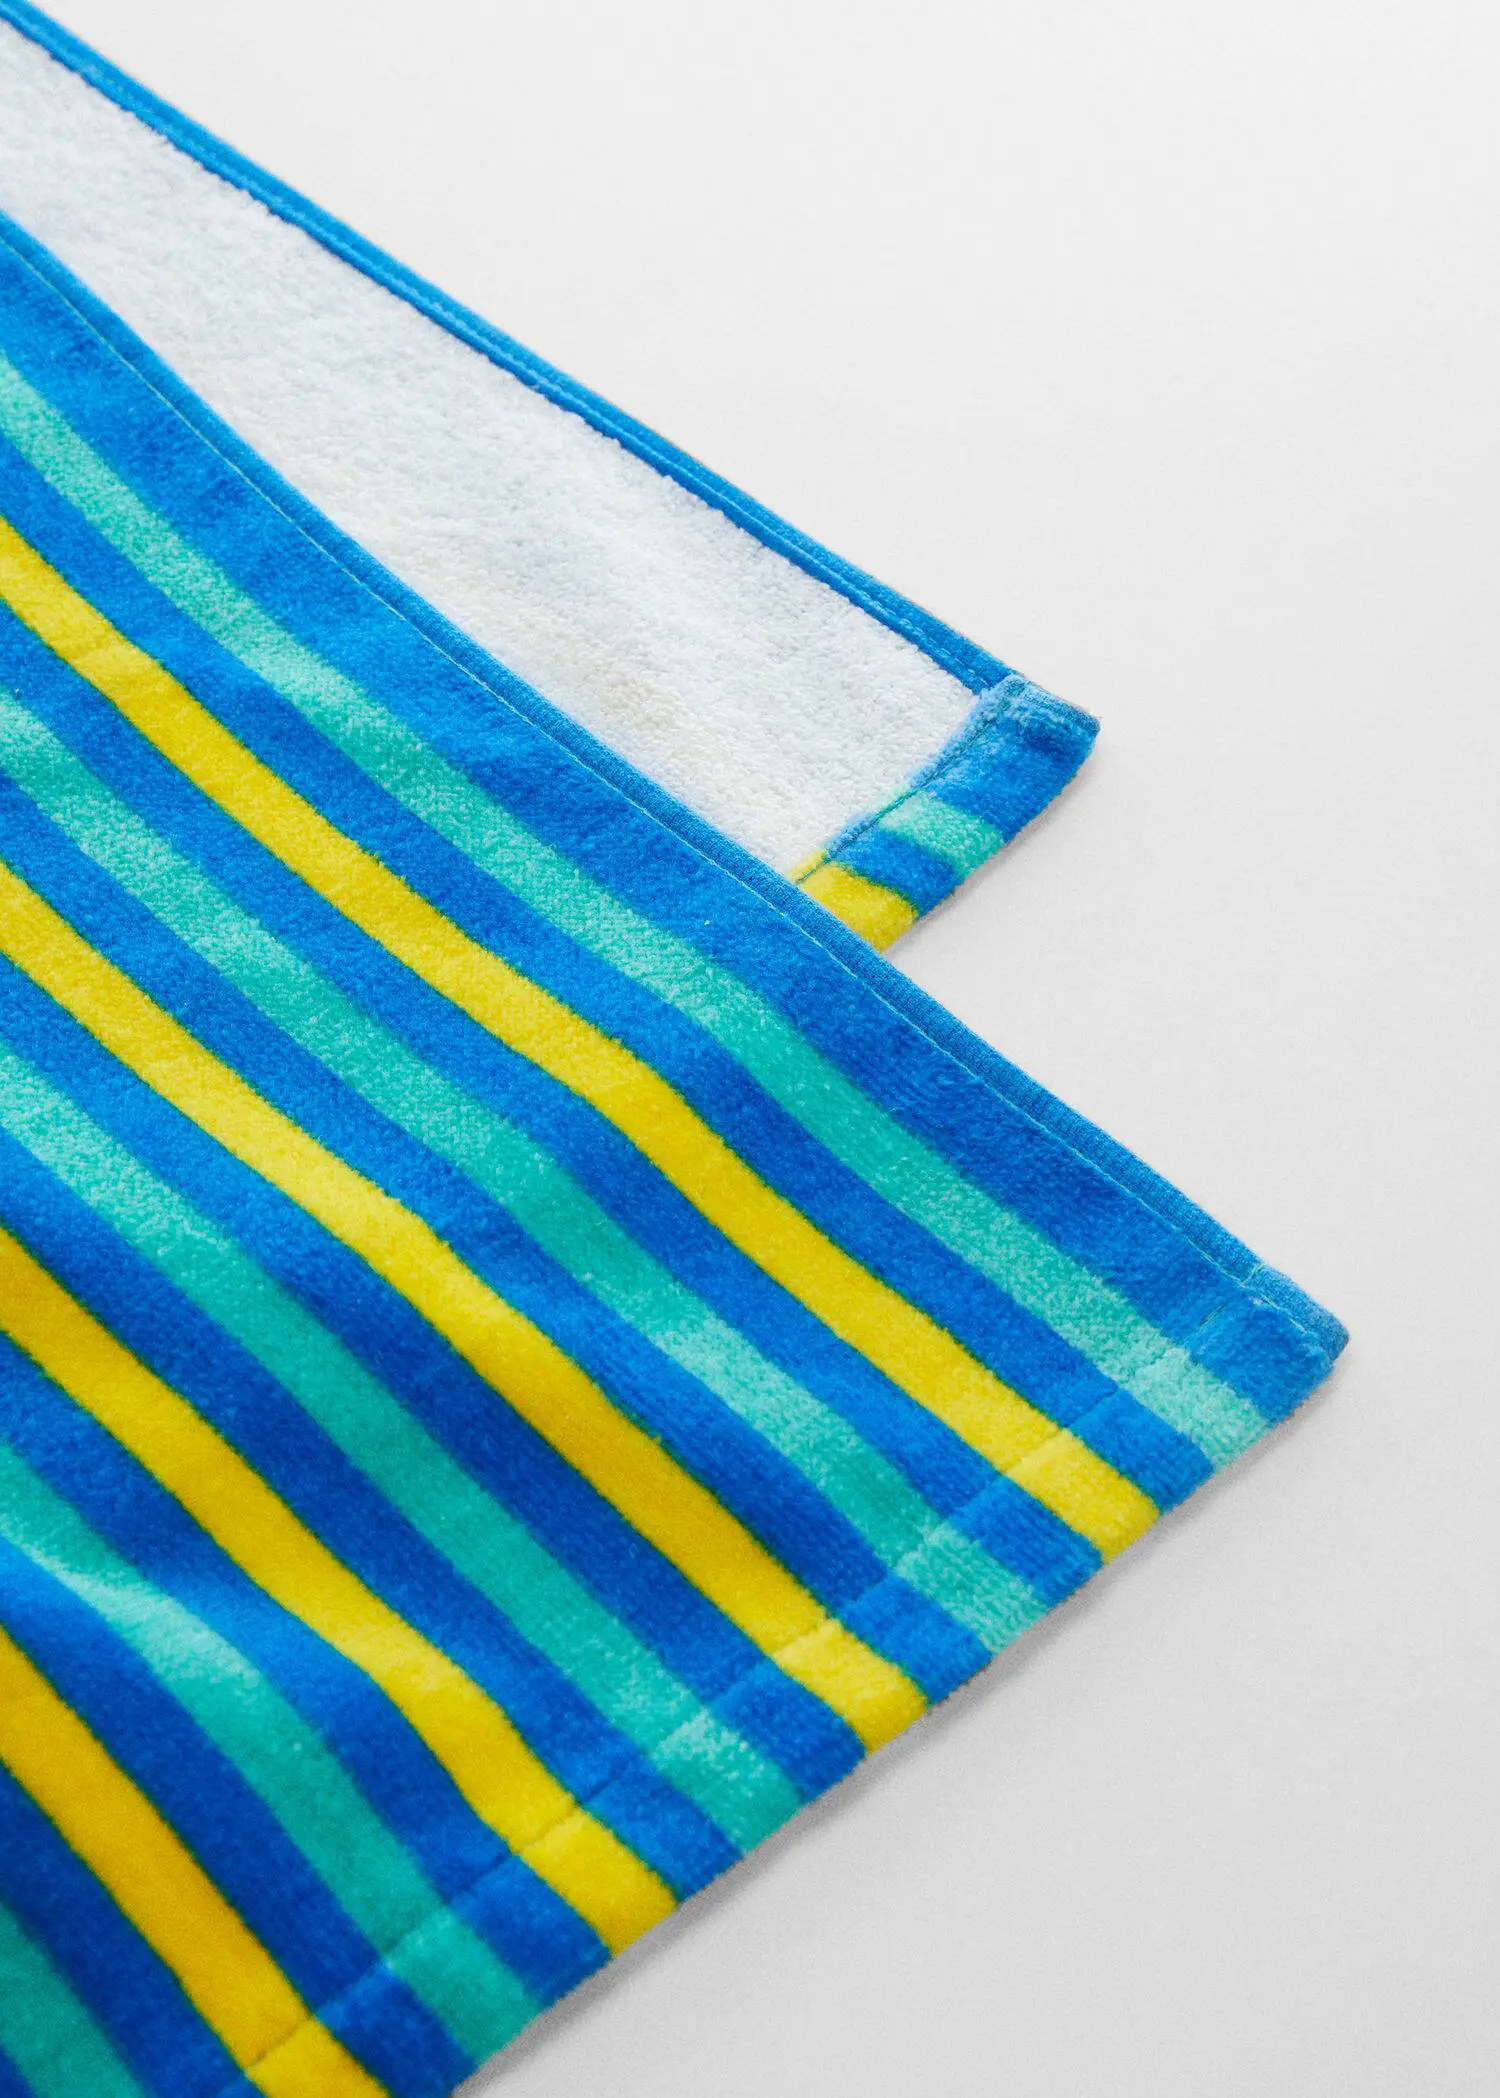 Mango Multi-colored striped beach towel. a close-up view of a blue, yellow, and green striped towel. 